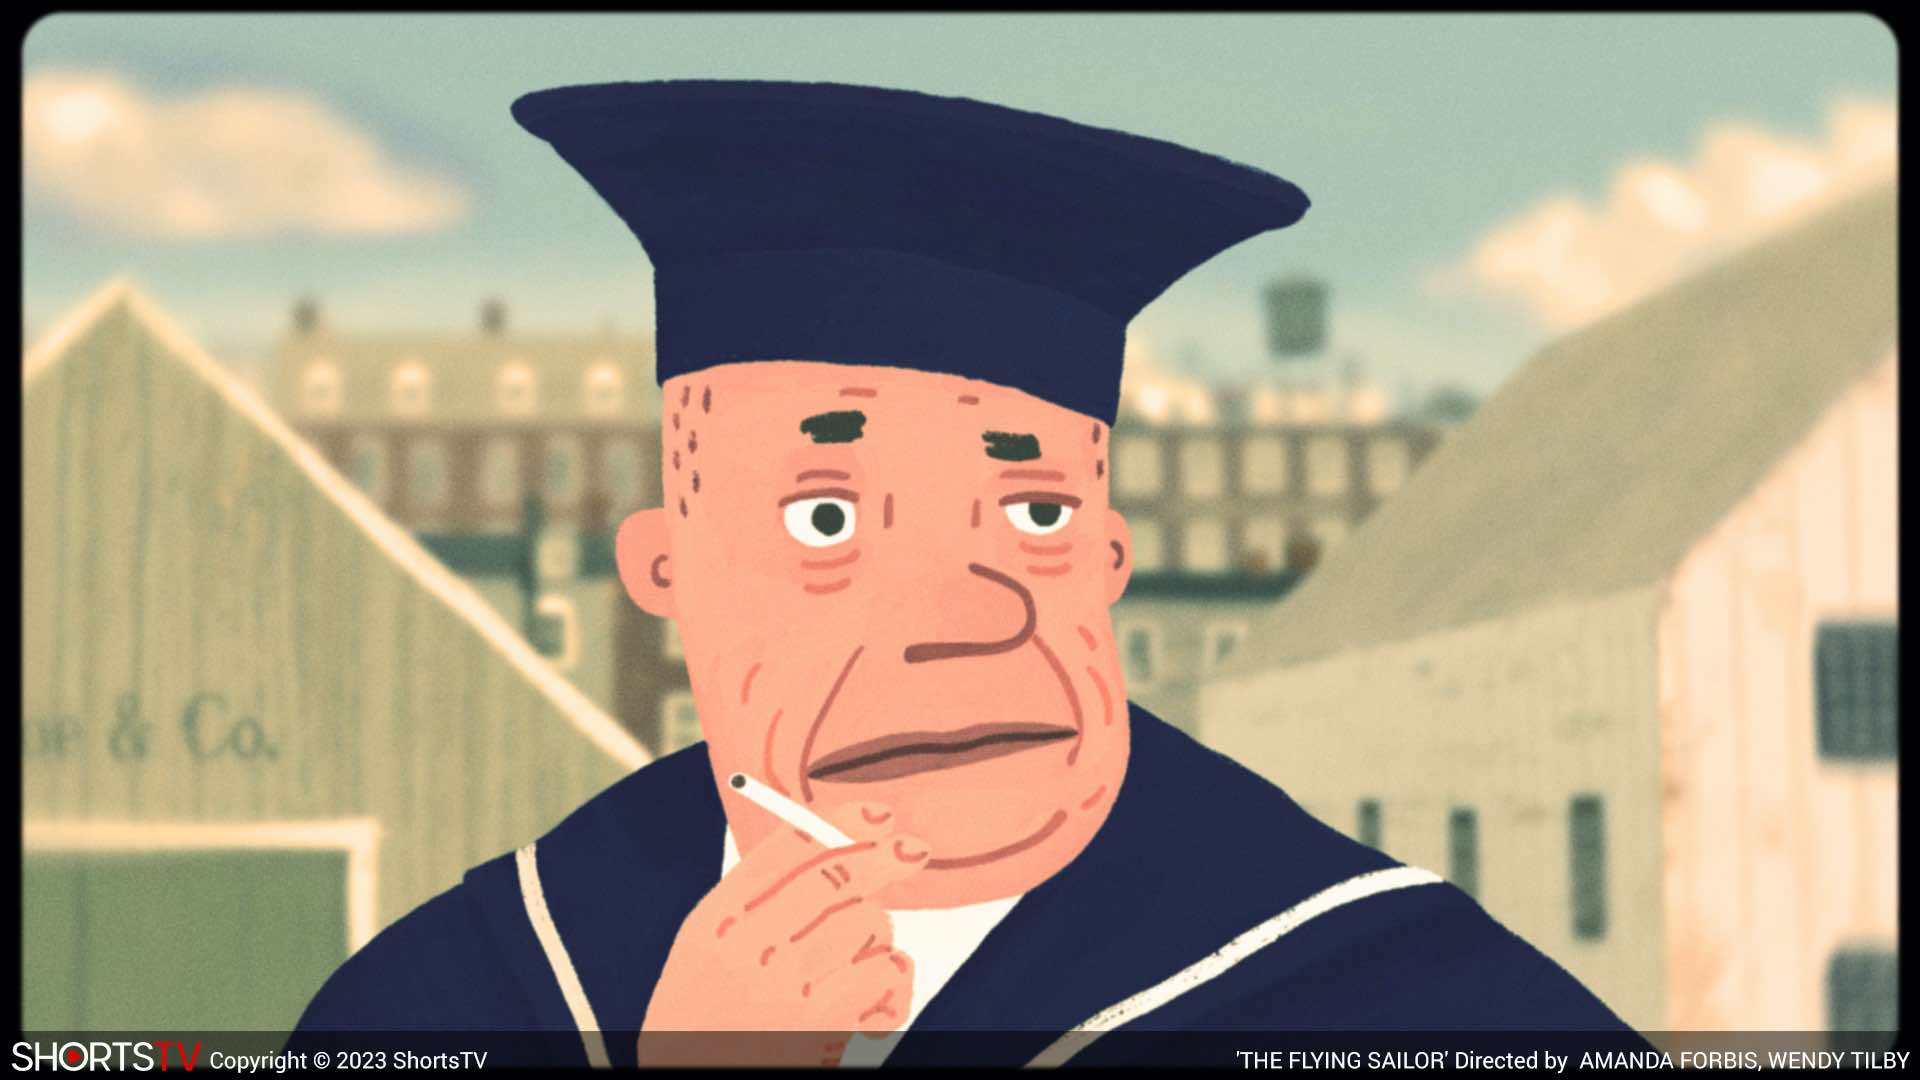 A navy in a cap smokes a cigarette in the Flying Sailor, an Oscar 2023 nominated animated short film